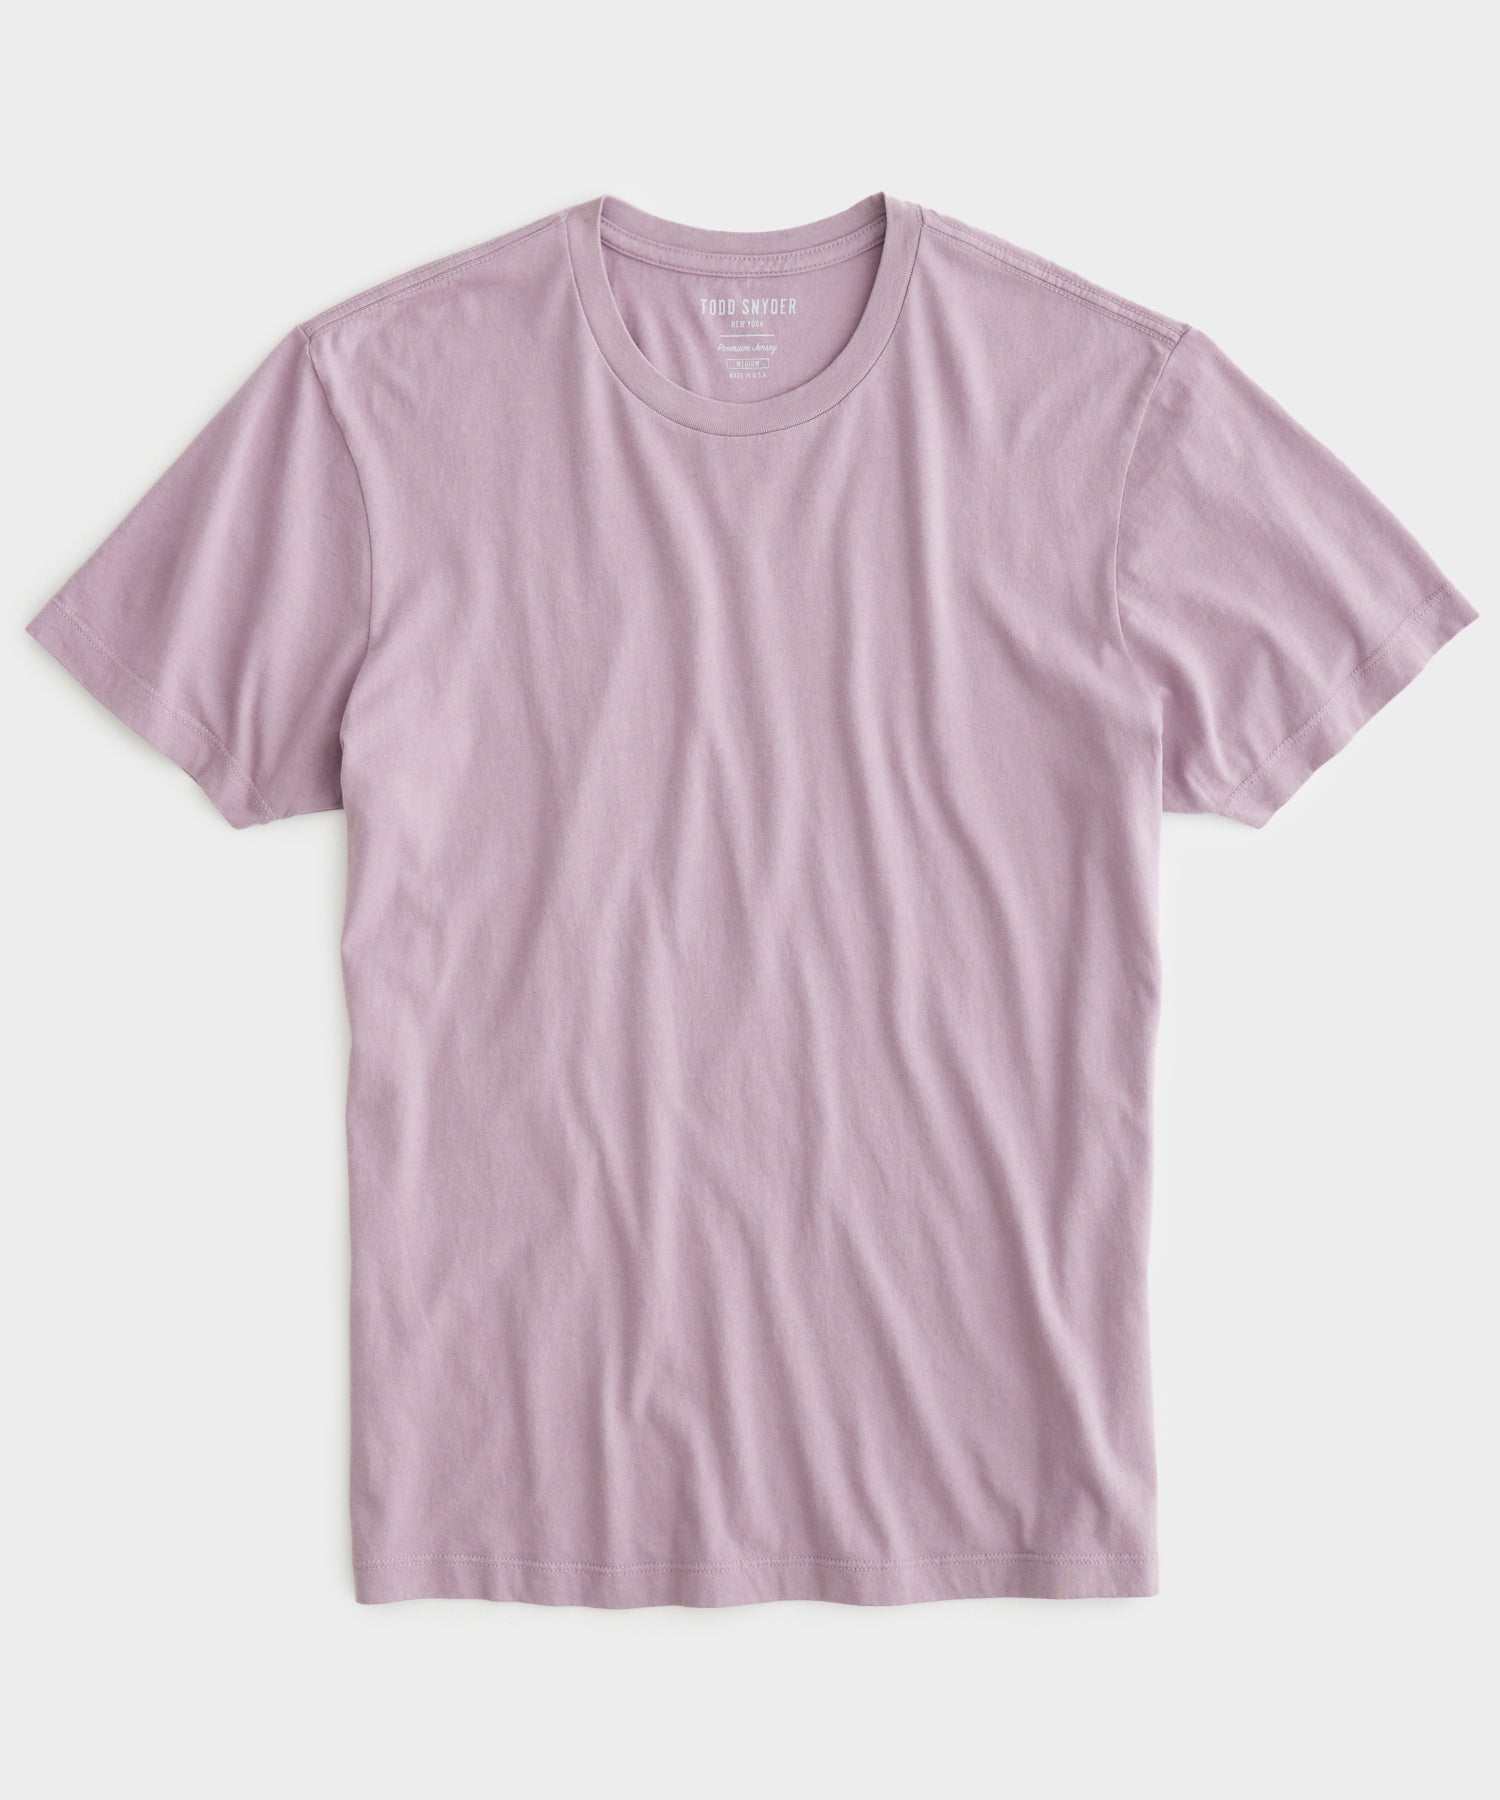 Made in L.A. Premium Jersey T-Shirt in Dried Lilac